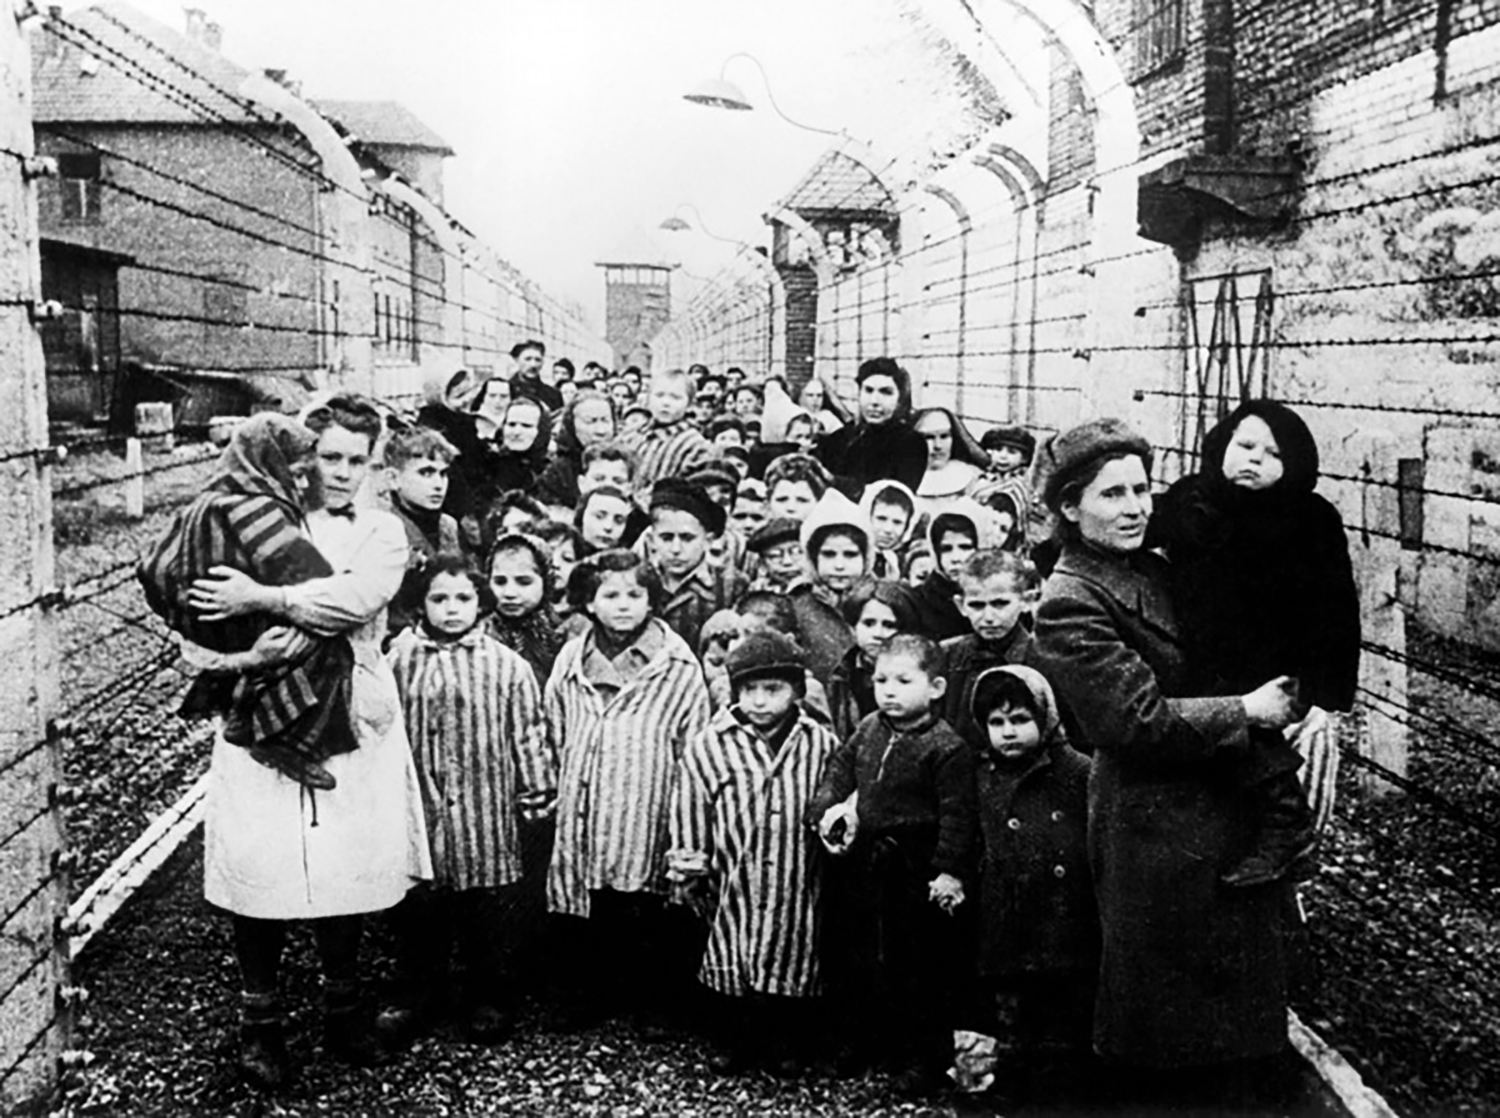 Remembering Auschwitz, with eyes on the present | Penn Today